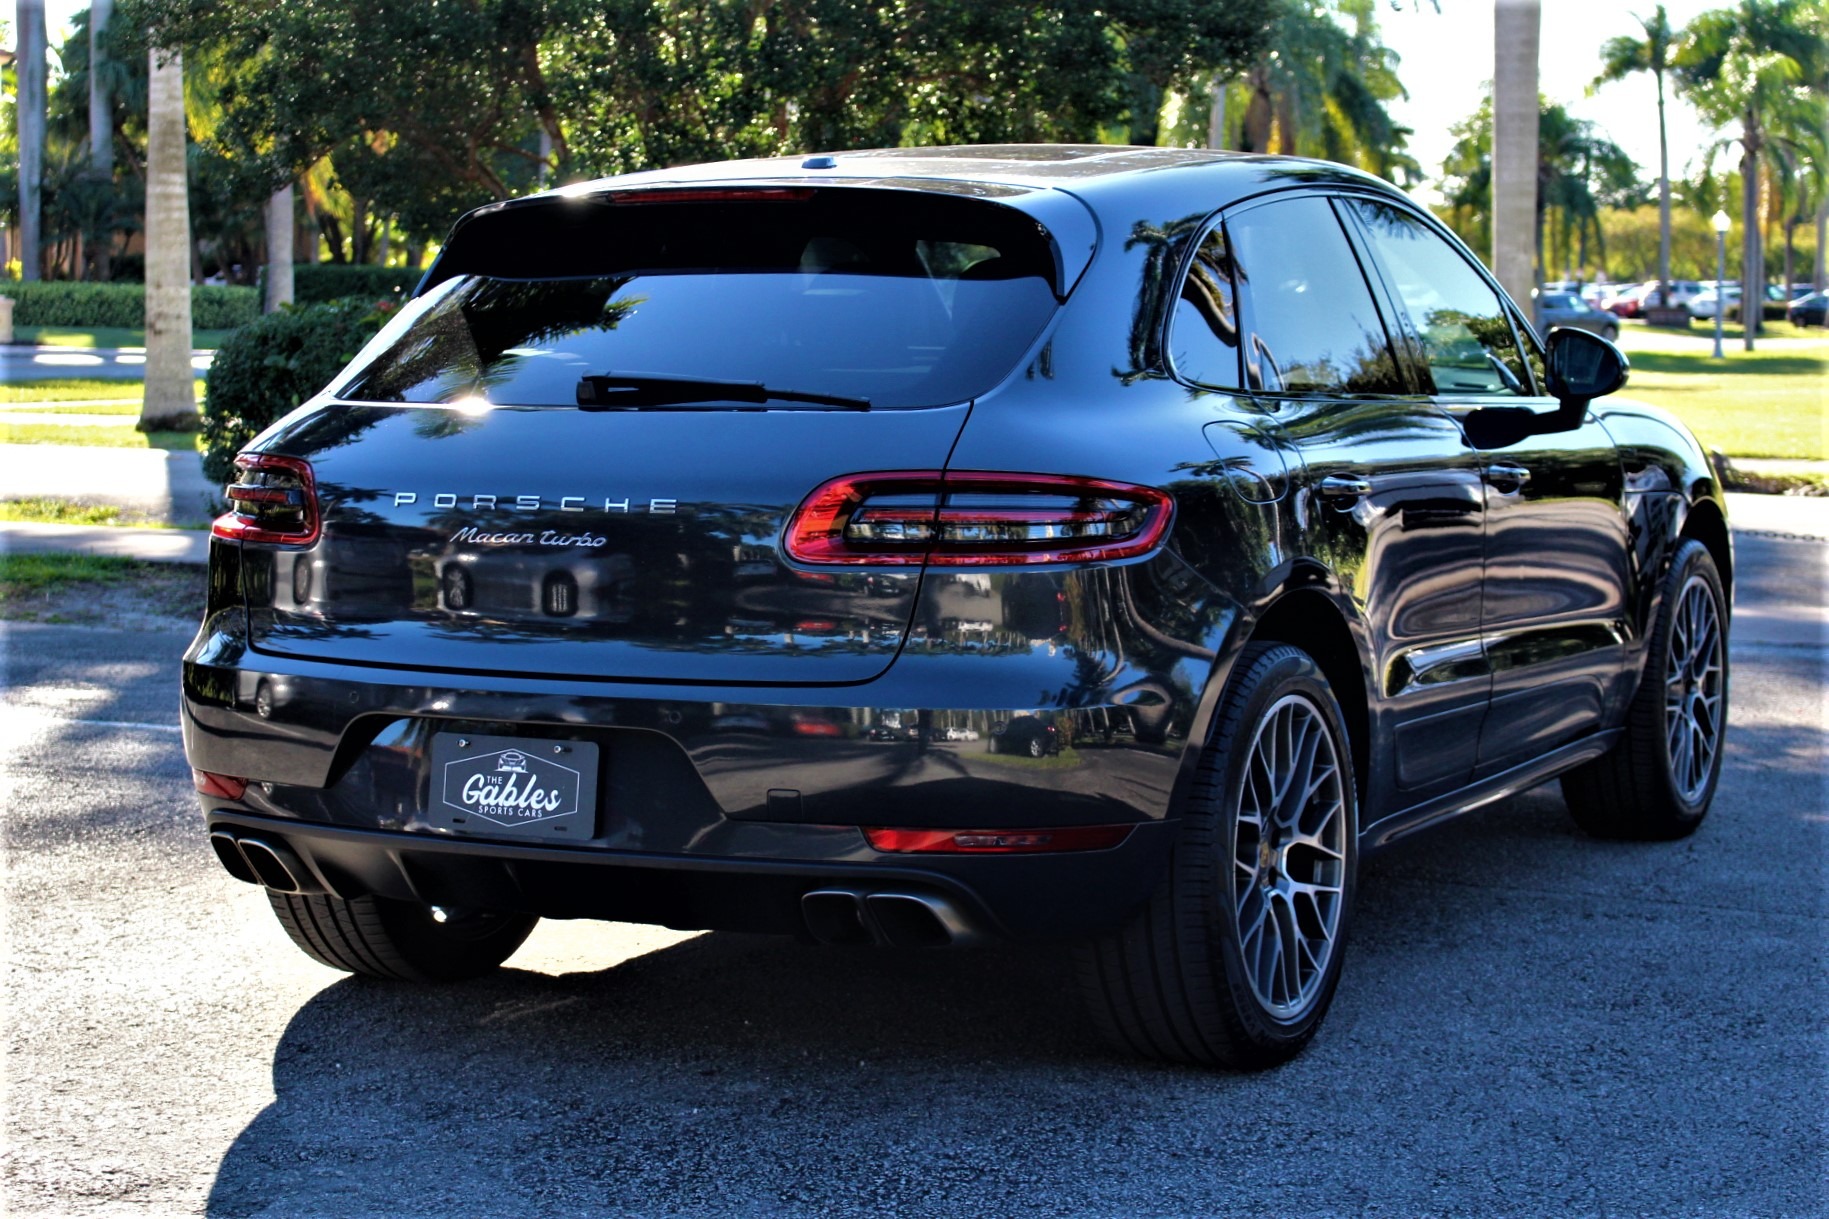 Used 2017 Porsche Macan Turbo for sale Sold at The Gables Sports Cars in Miami FL 33146 2